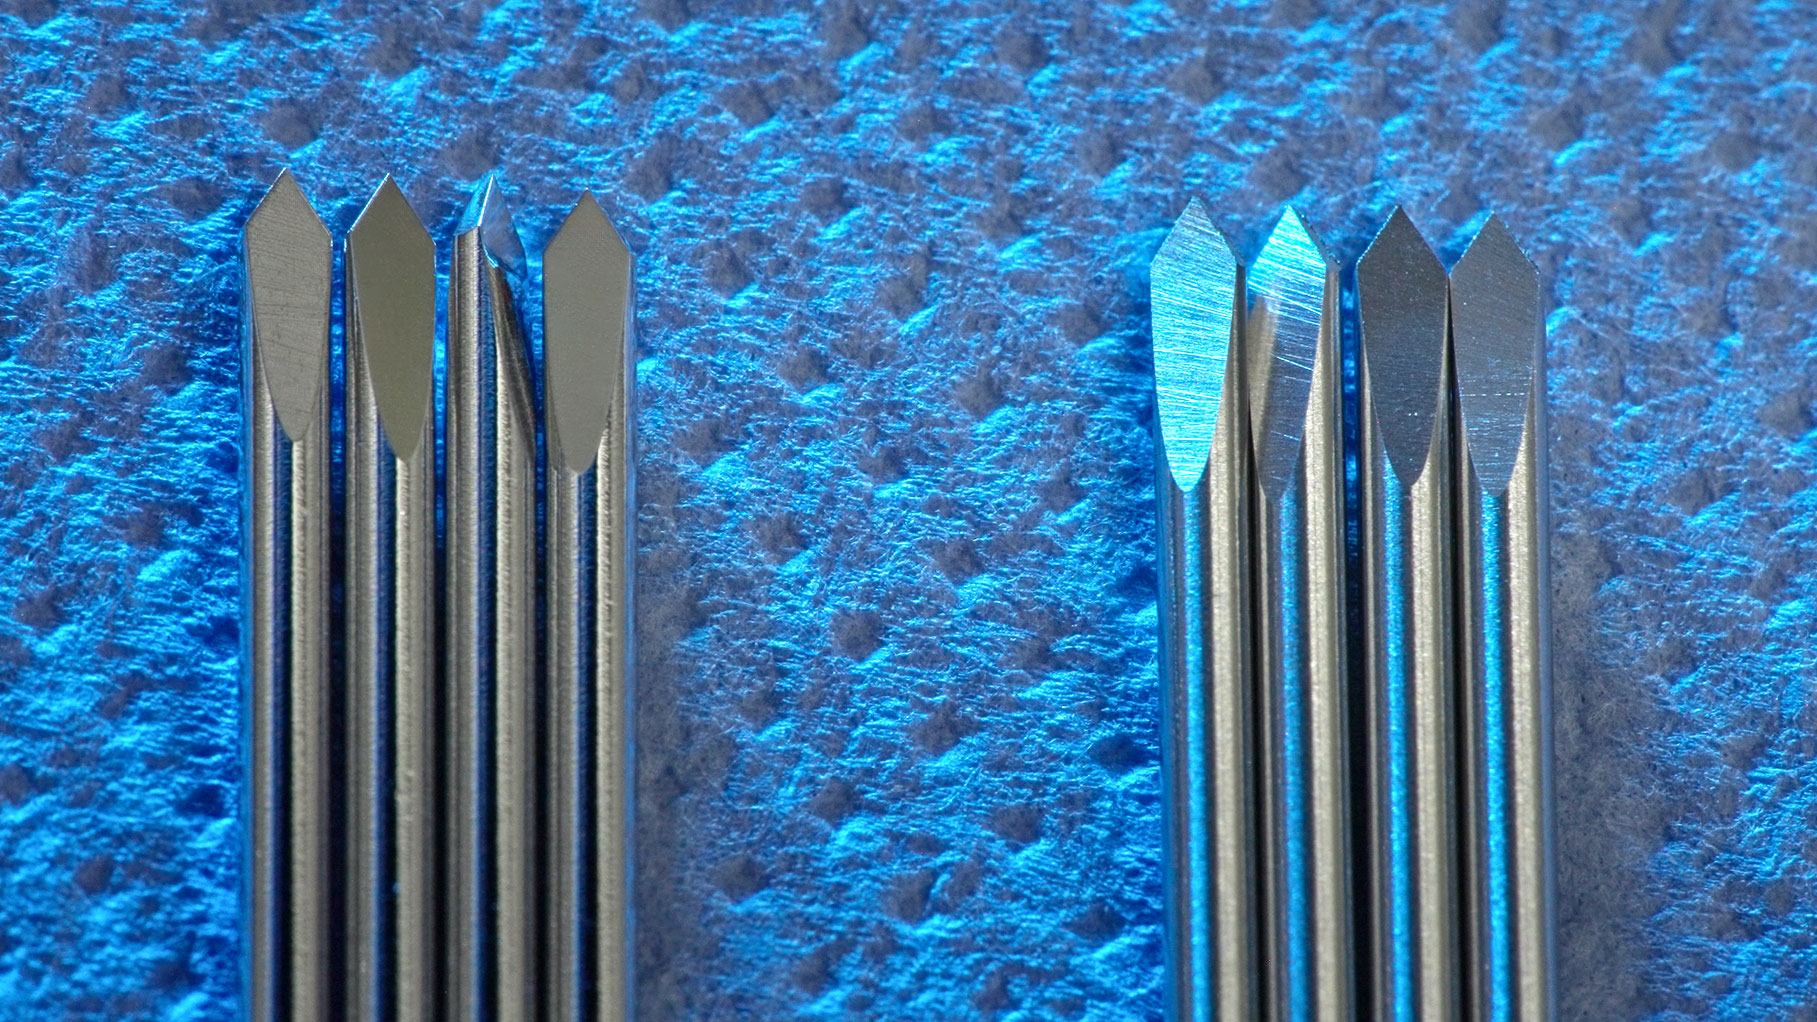 Kirschner drill wires in comparison - left electropolished, right uncoated